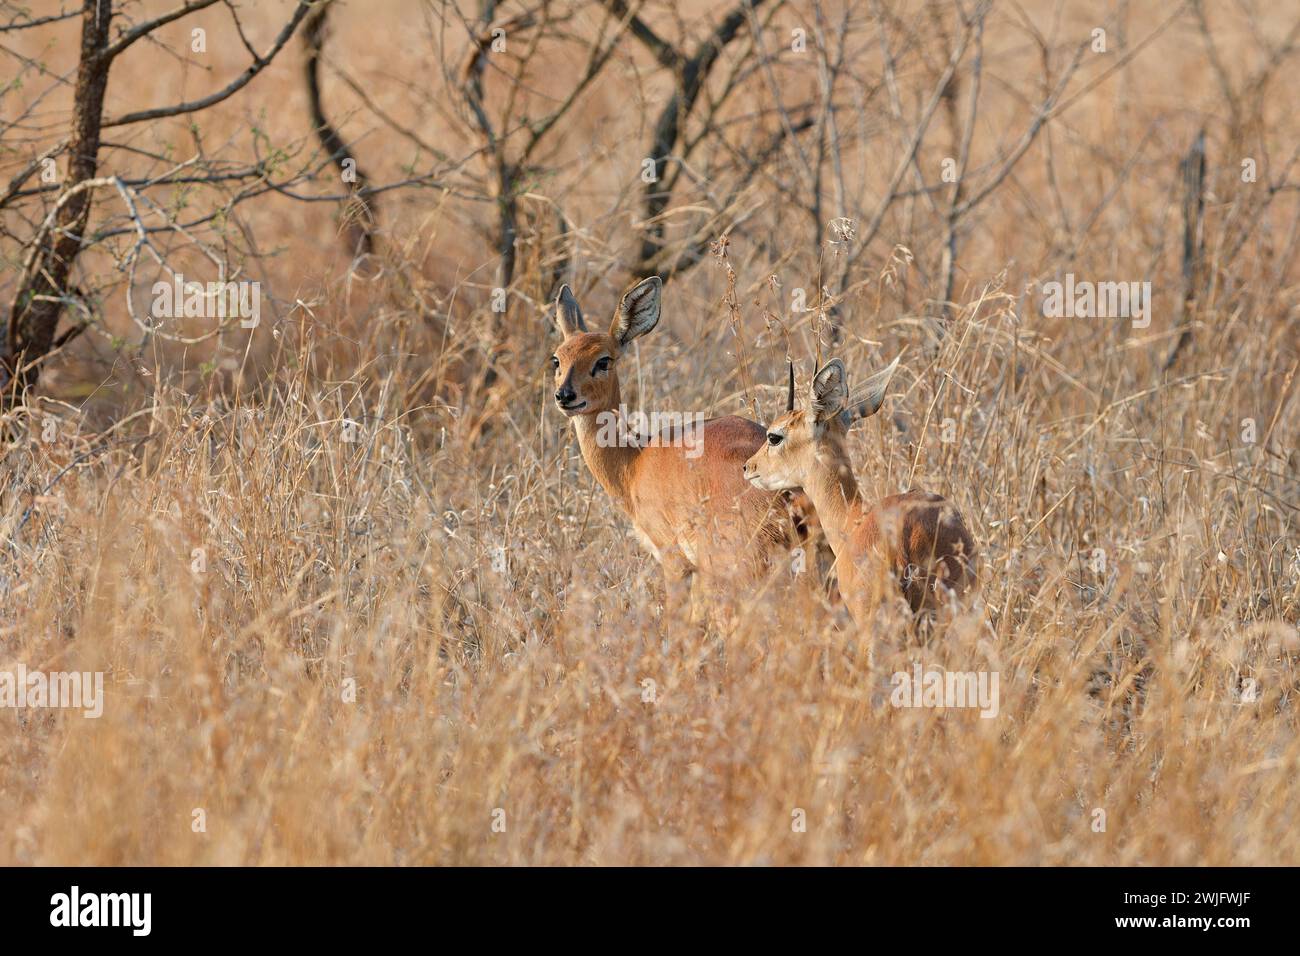 Steenboks (Raphicerus campestris), adults, male and female, standing in tall dry grass, alert, Kruger National Park, South Africa, Africa Stock Photo